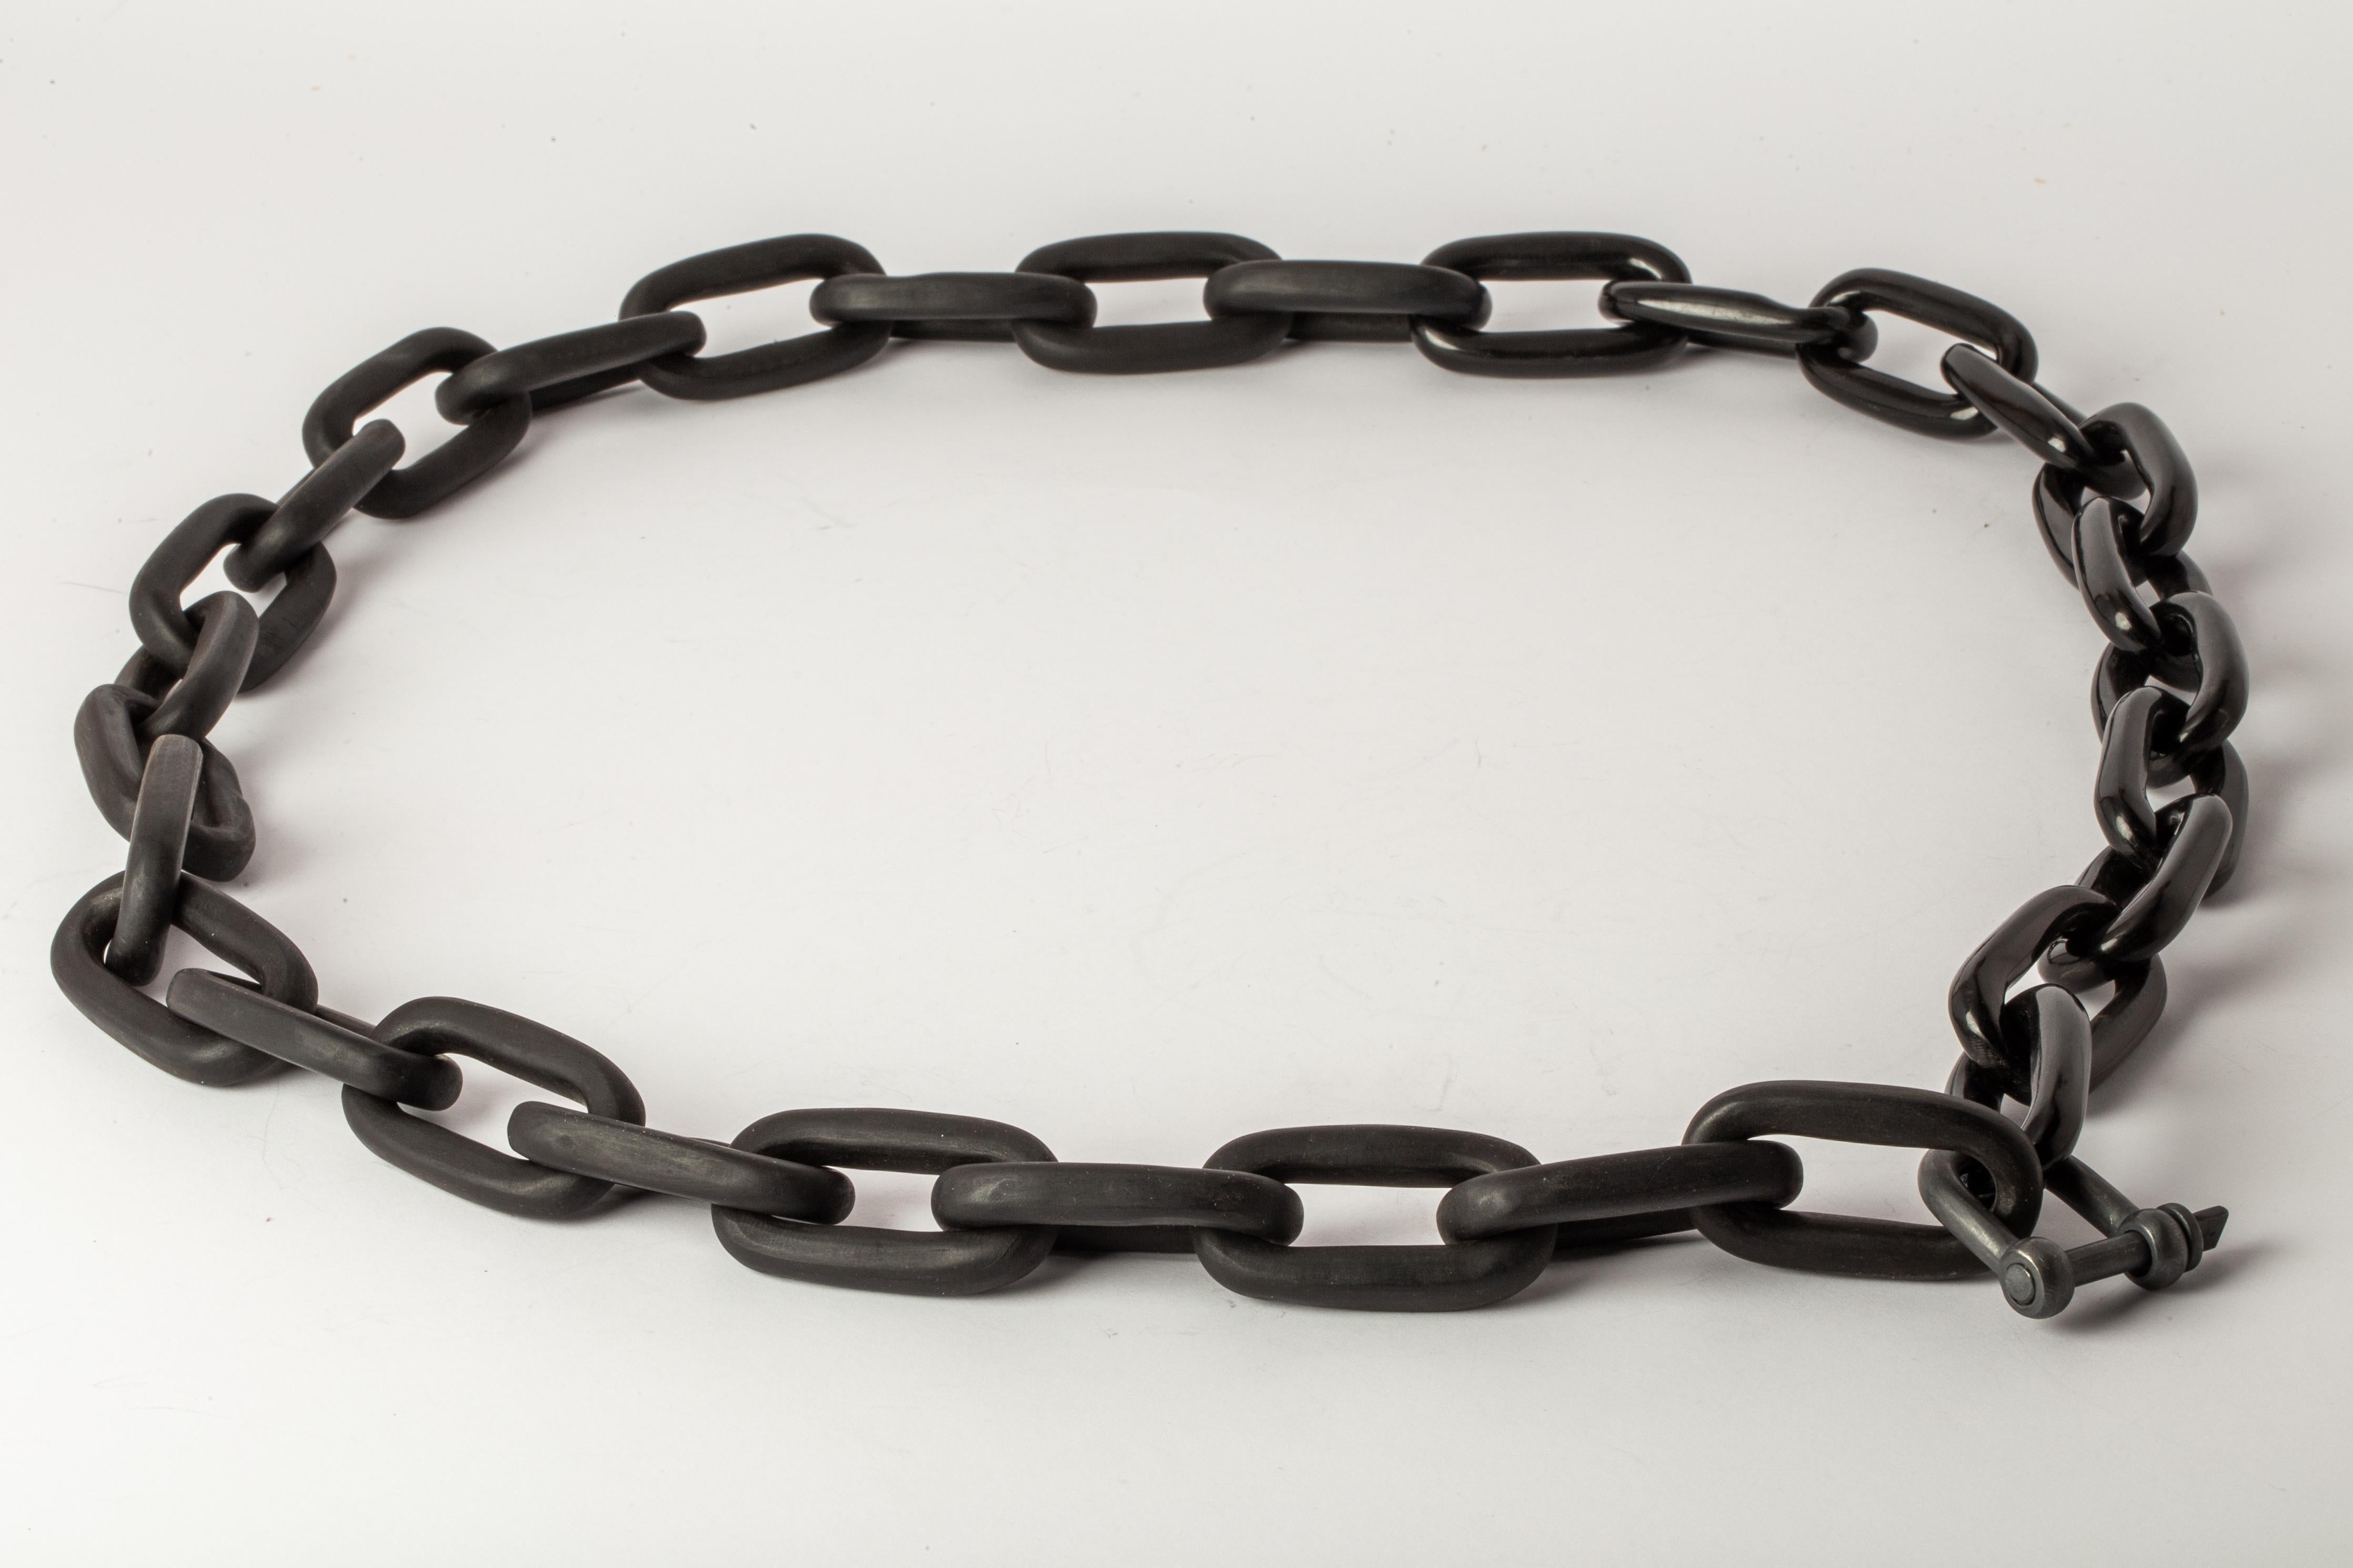 All organic chain is carved by hand. Chains made from horn is modeled and constructed into chain links
The Charm System is an interrelated group of products that can be mixed and matched or worn individually.
Chain link size (L × H): 50 mm × 25